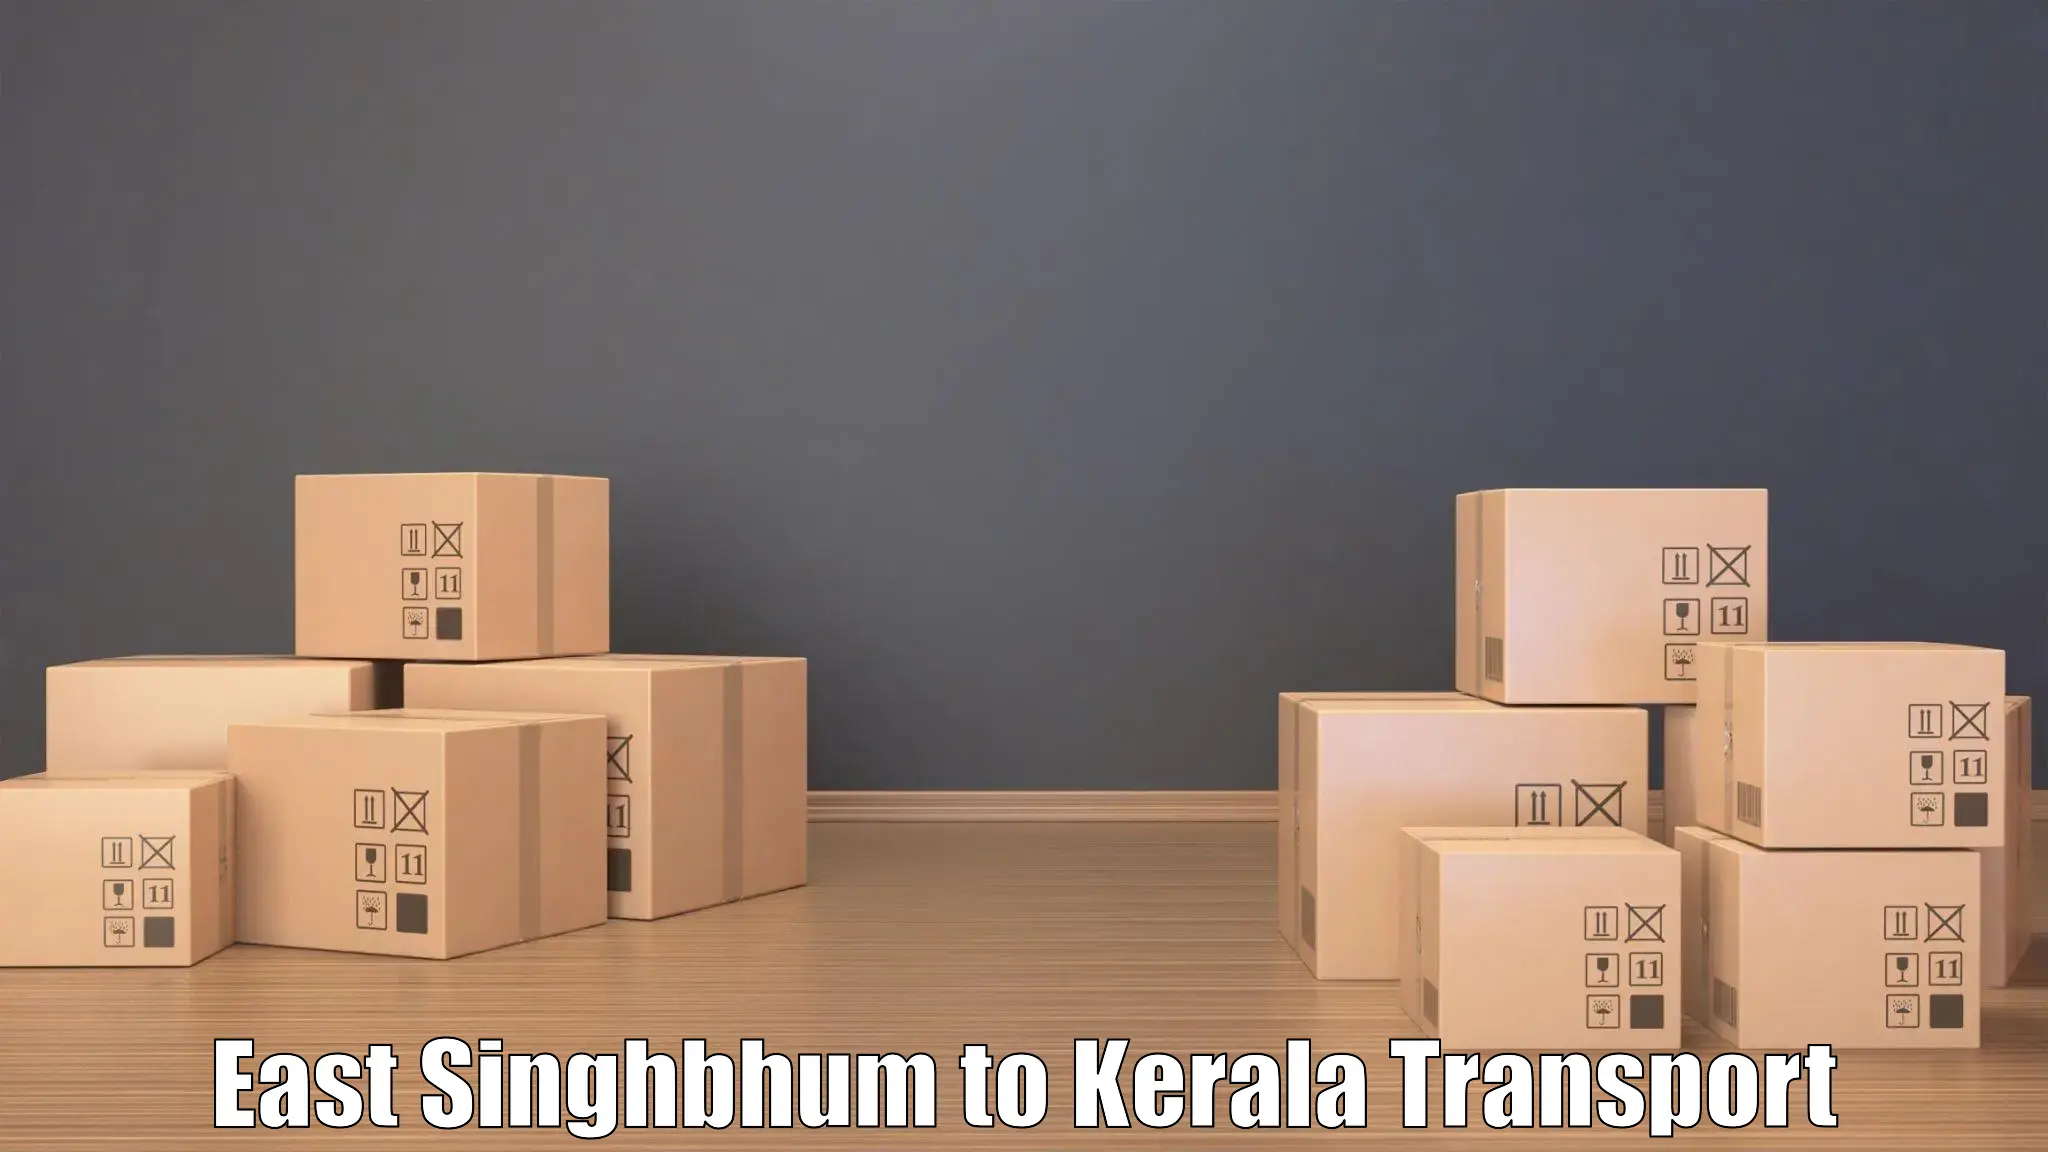 Transport in sharing in East Singhbhum to Chalakudy